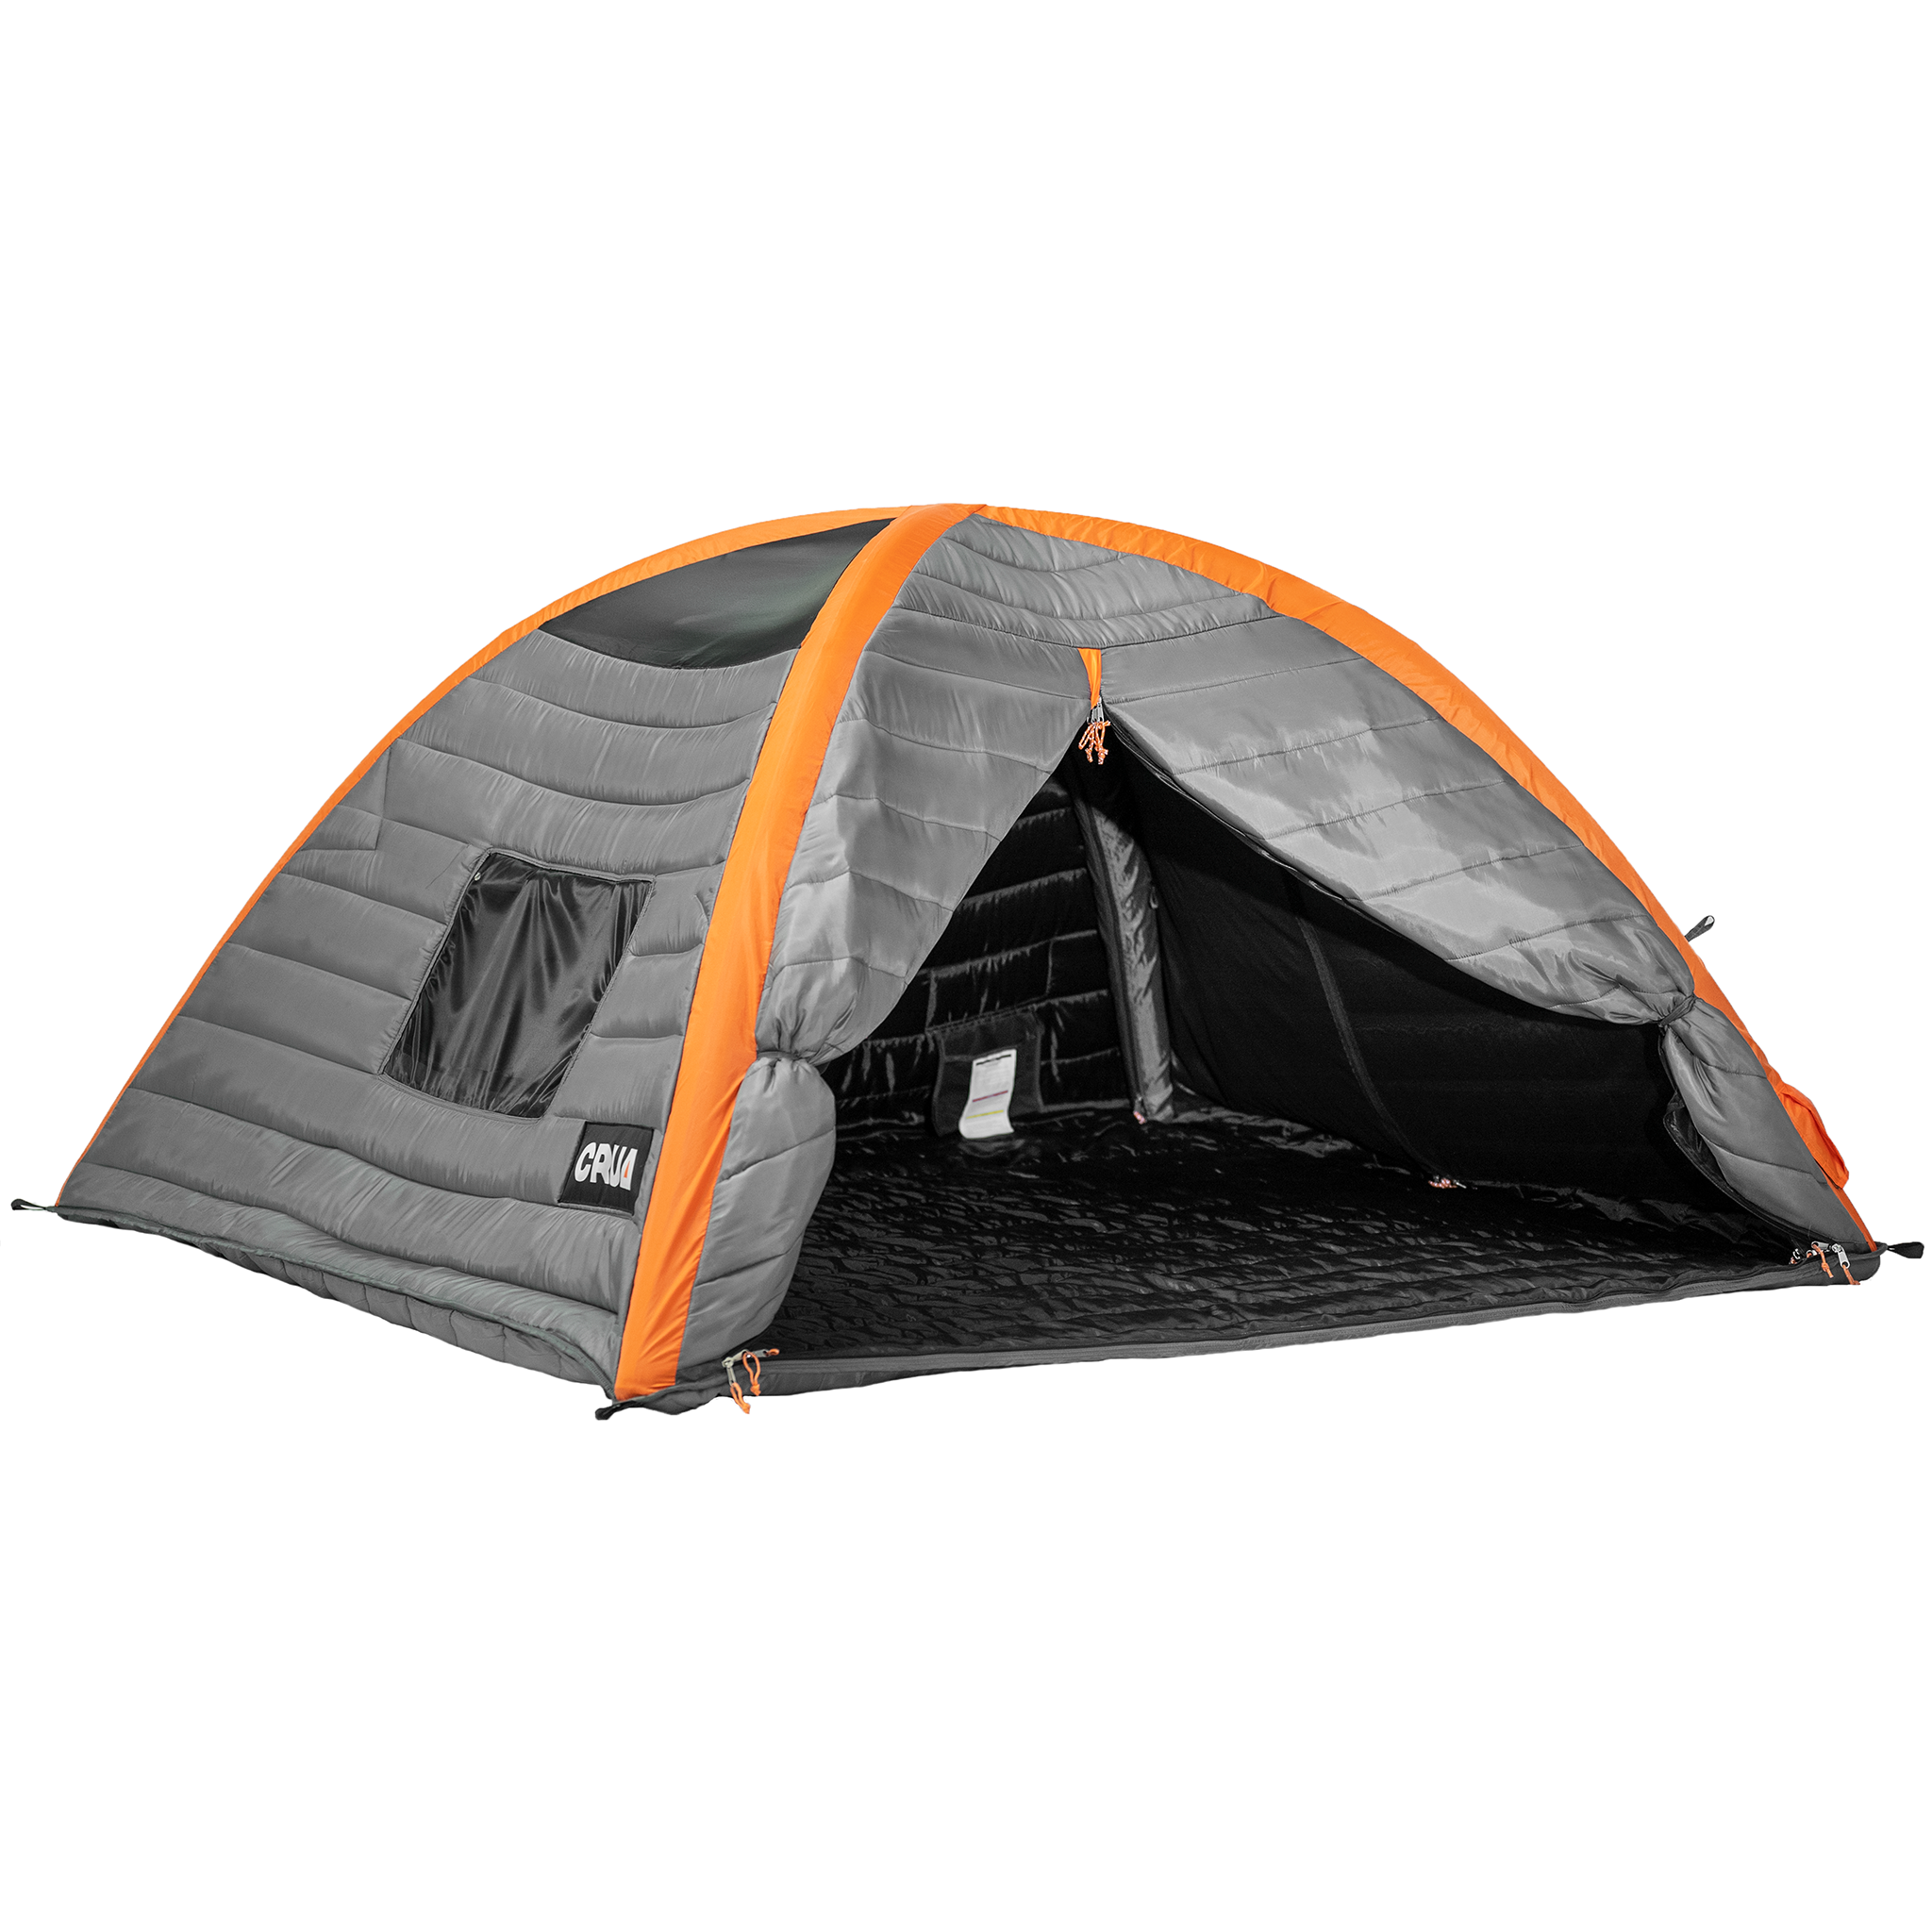 Culla Family | 5 Person Insulated Inner Tent With Temperature Regulating, Noise Dampening And Light Blocking Features